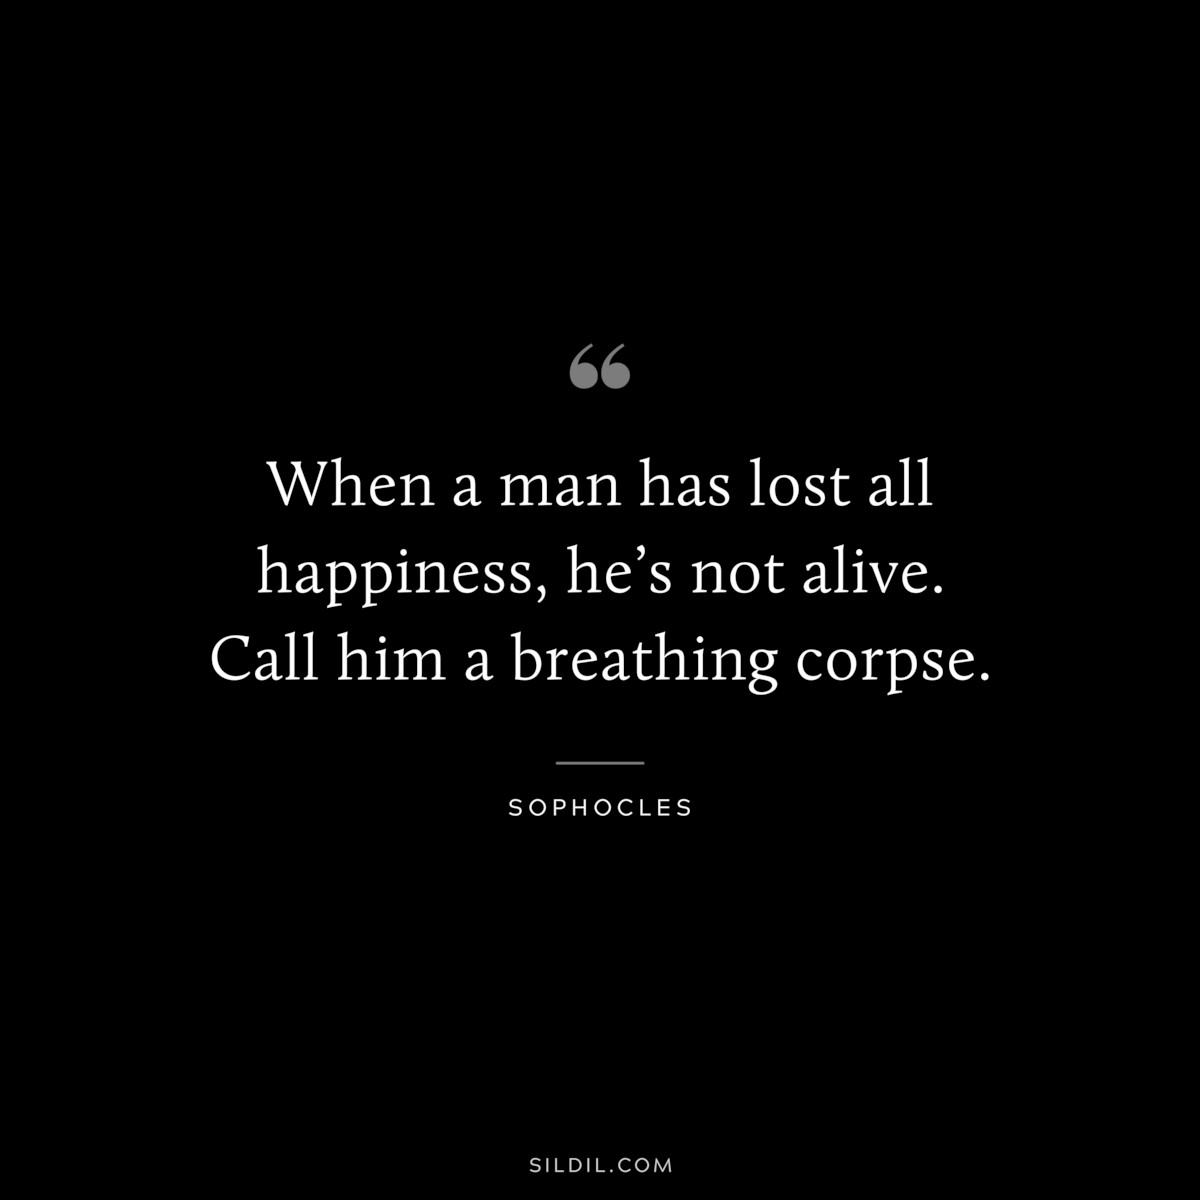 When a man has lost all happiness, he’s not alive. Call him a breathing corpse. ― Sophocles